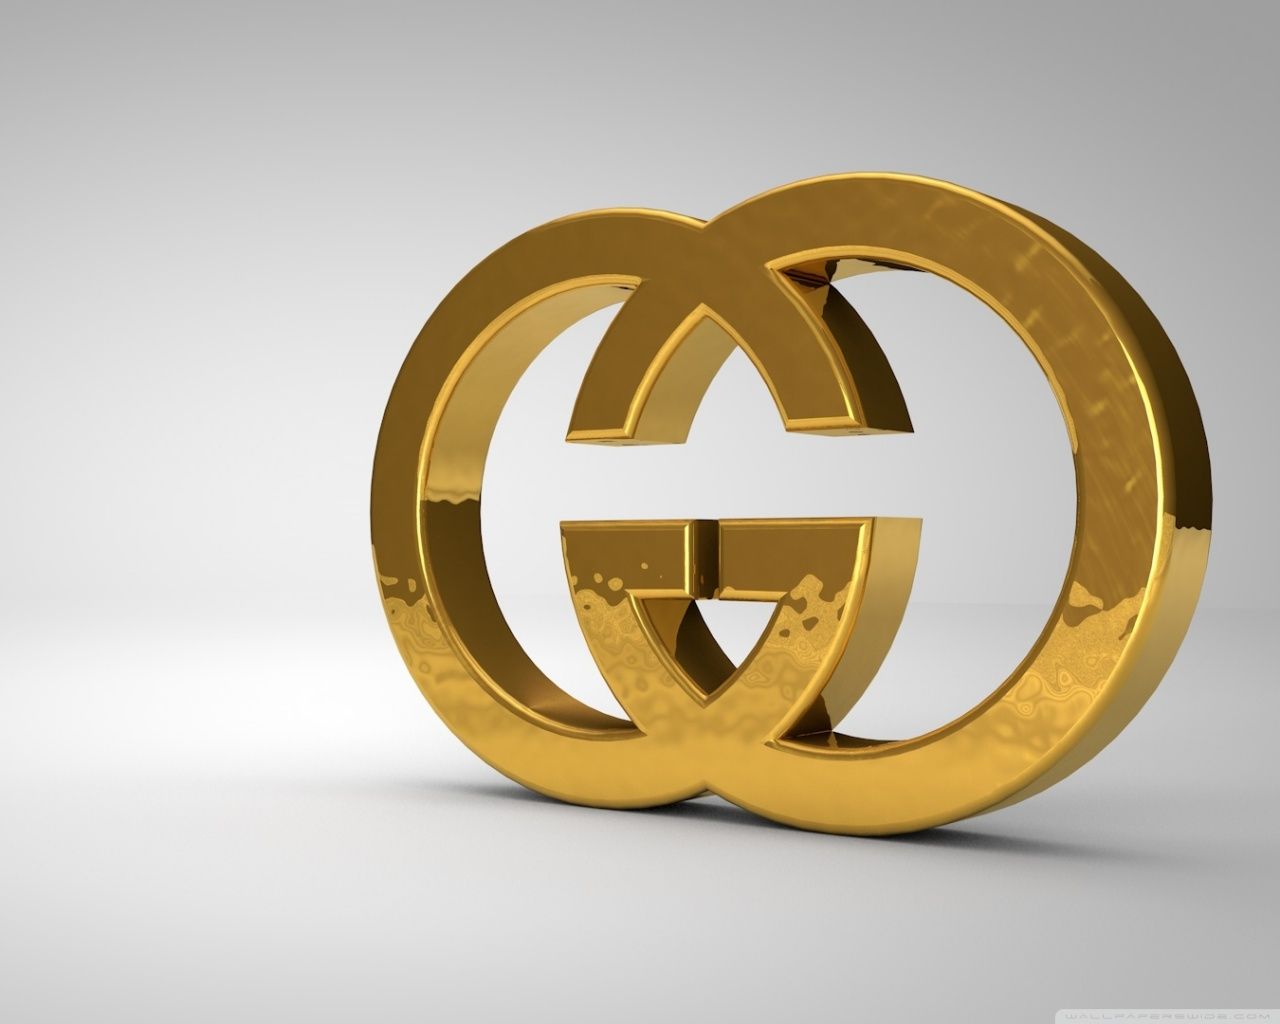 Download wallpaper with product Gucci with tags: Logo, Laptop, Gold, Gucci, Studio